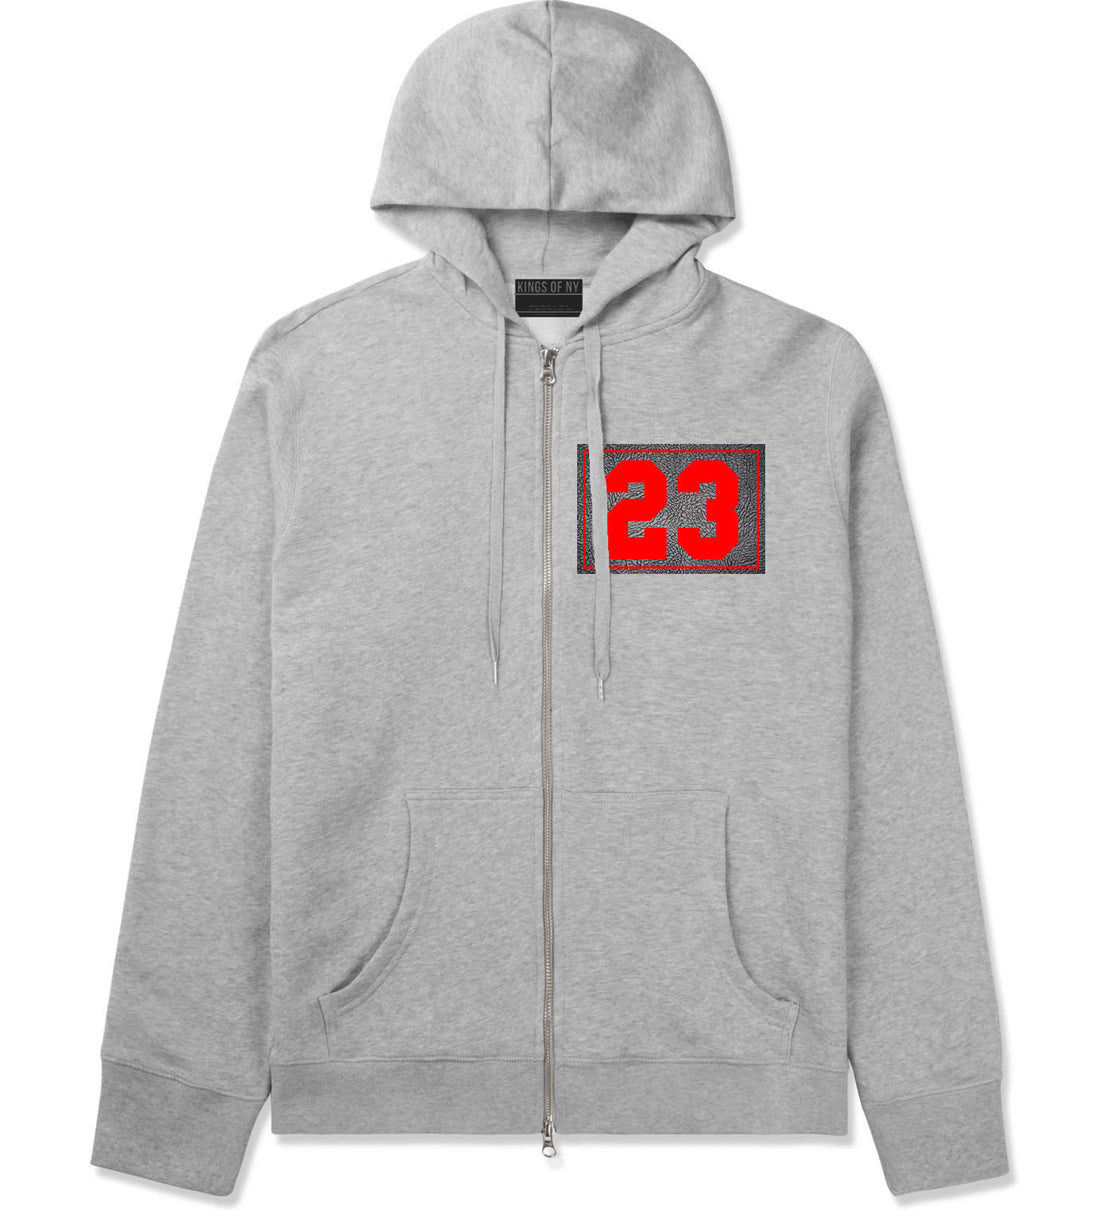 23 Cement Red Jersey Zip Up Hoodie in Grey By Kings Of NY